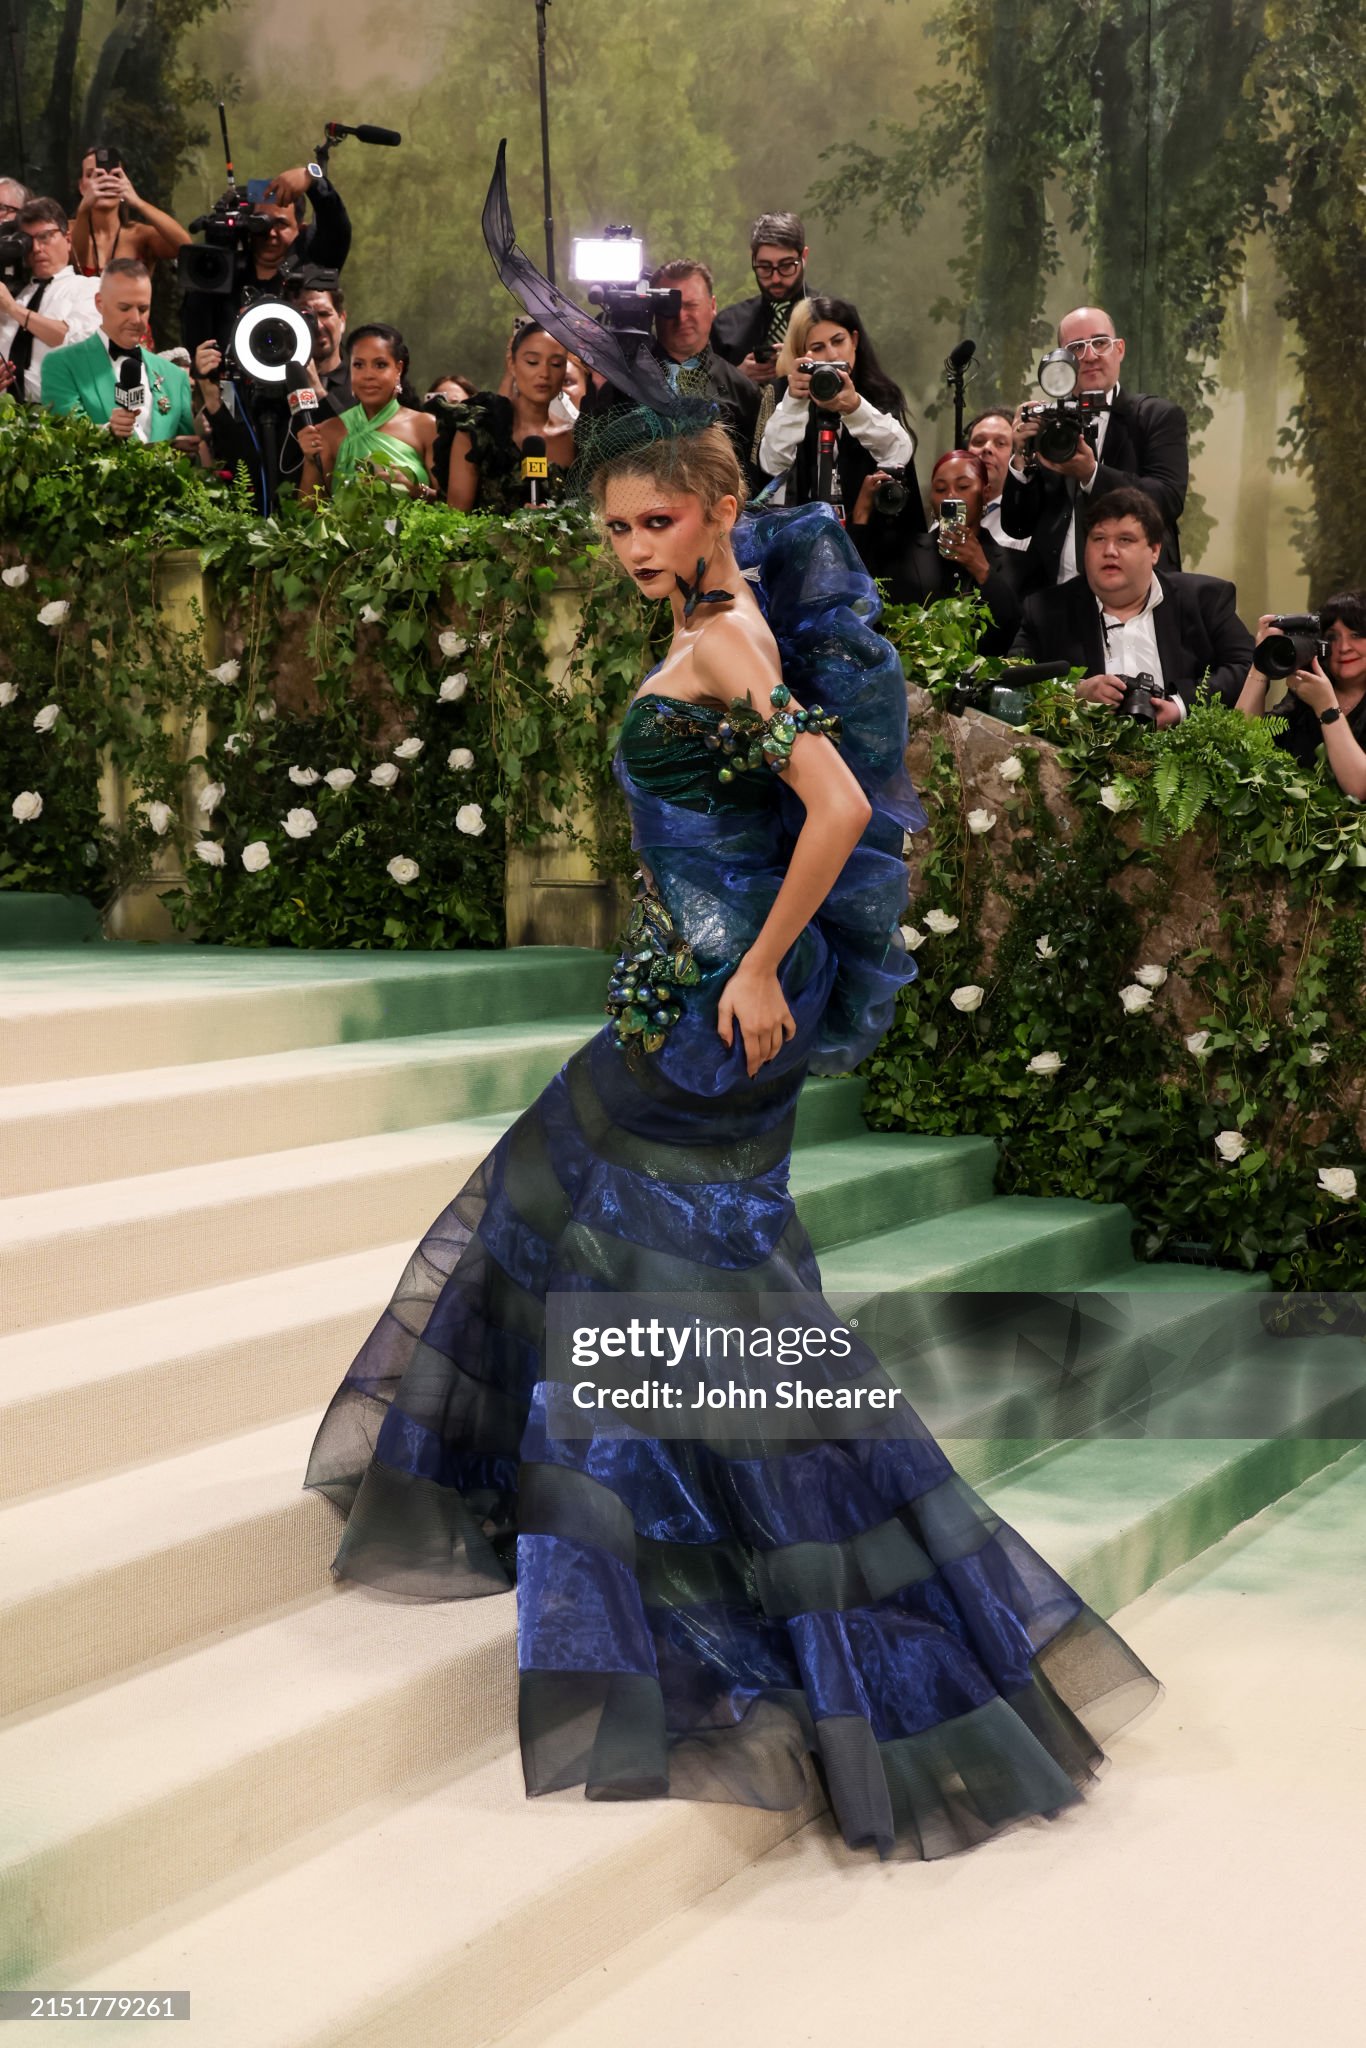 gettyimages-2151779261-2048x2048.jpg